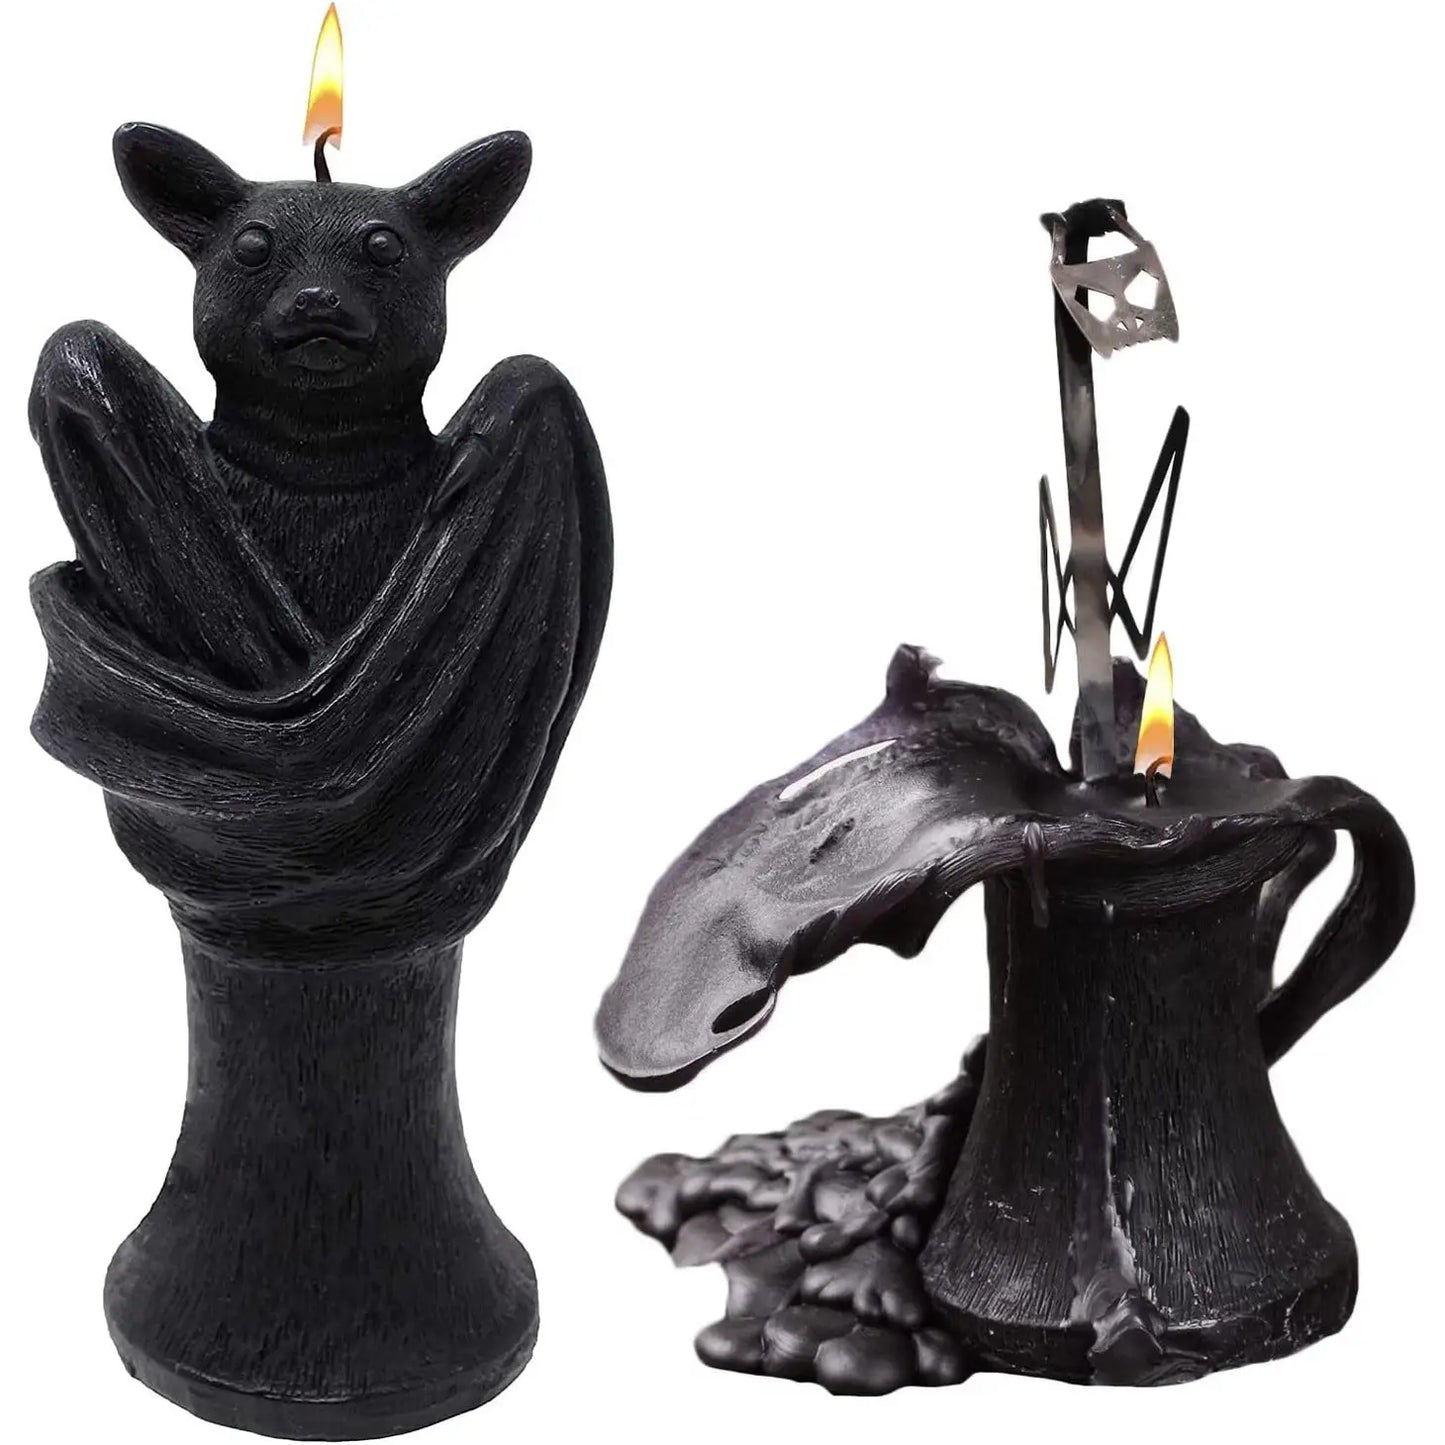 Halloween Bat Shaped Candle With Metal Skeleton Inside